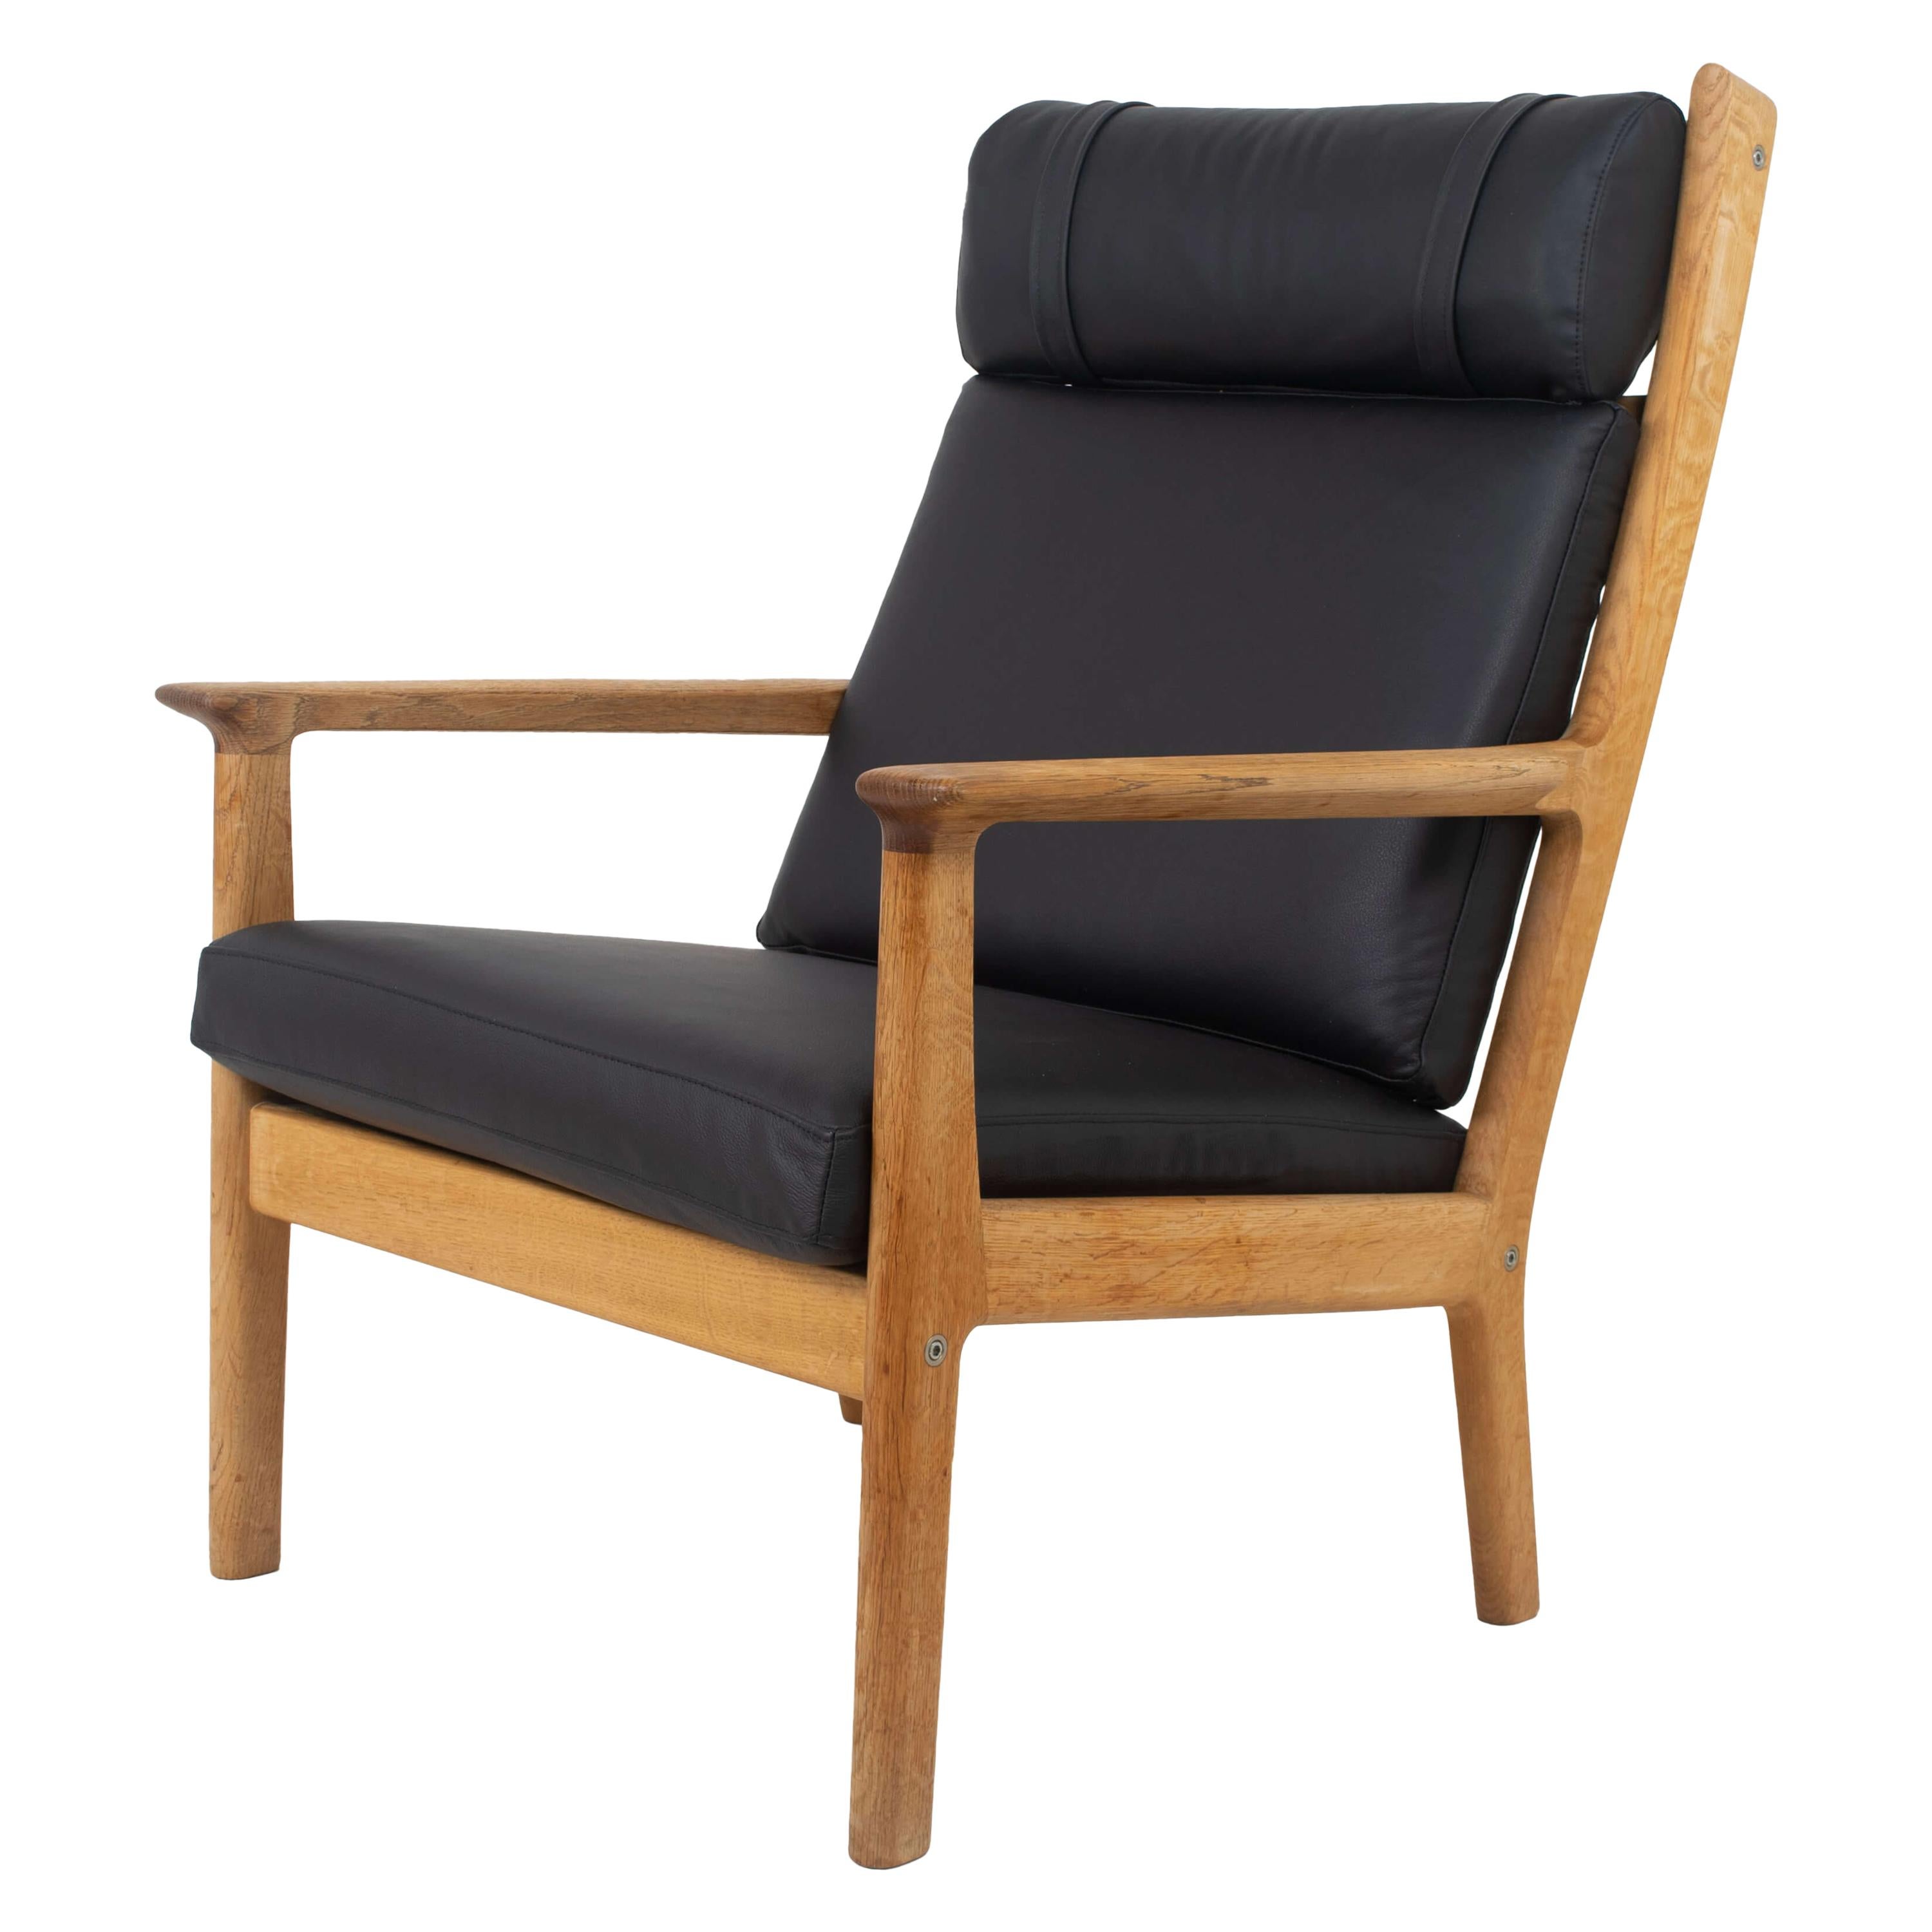 Hans Wegner Fauteuil GE 265 for GETAMA in Oak and Black Leather, 1980 Sale at 1stDibs